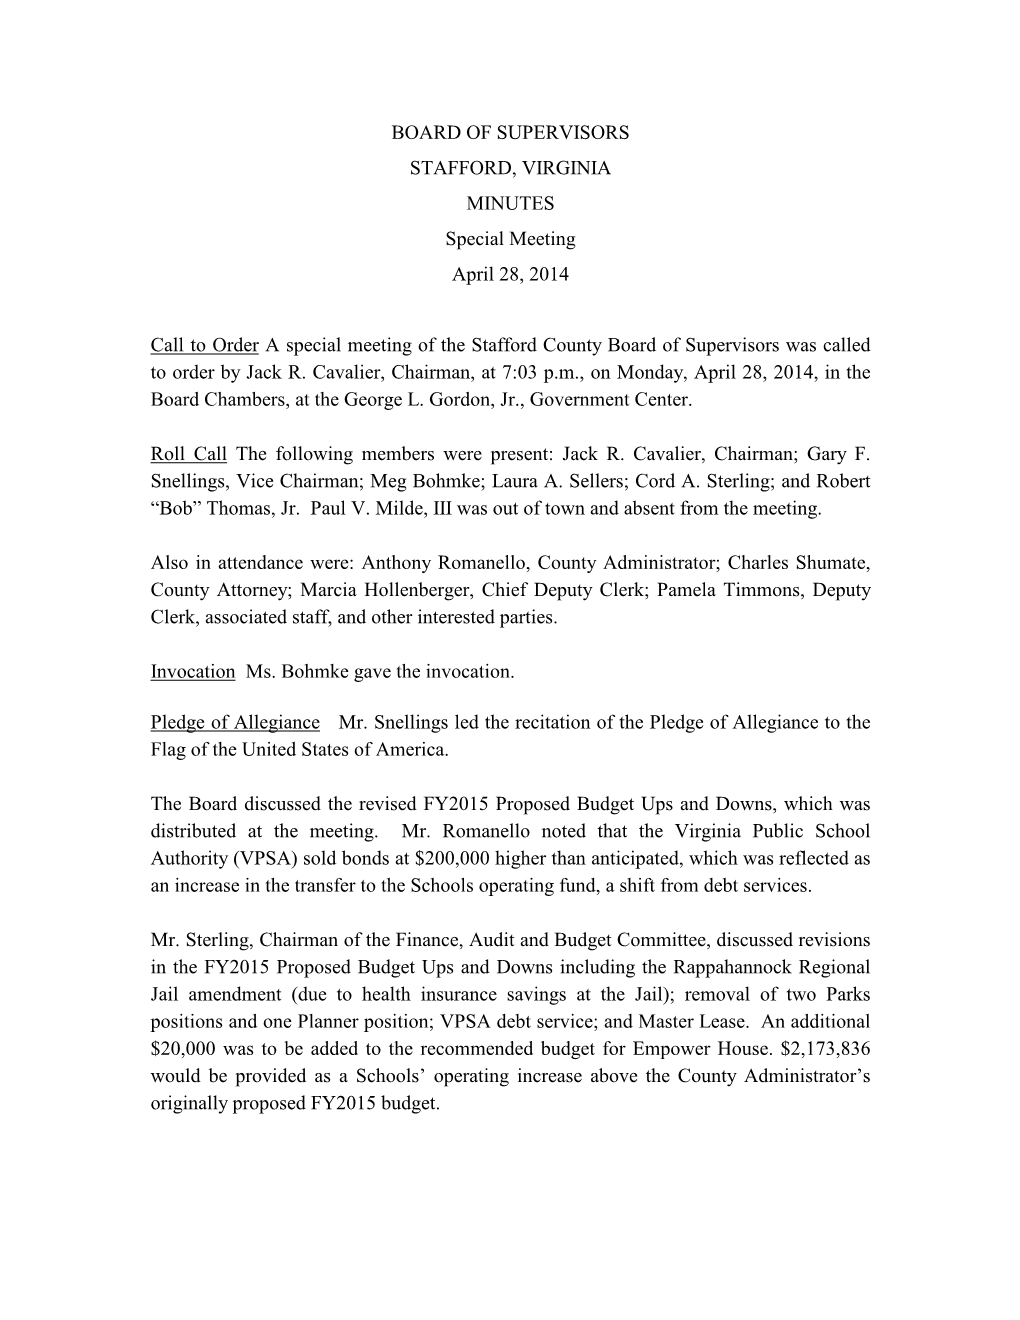 BOARD of SUPERVISORS STAFFORD, VIRGINIA MINUTES Special Meeting April 28, 2014